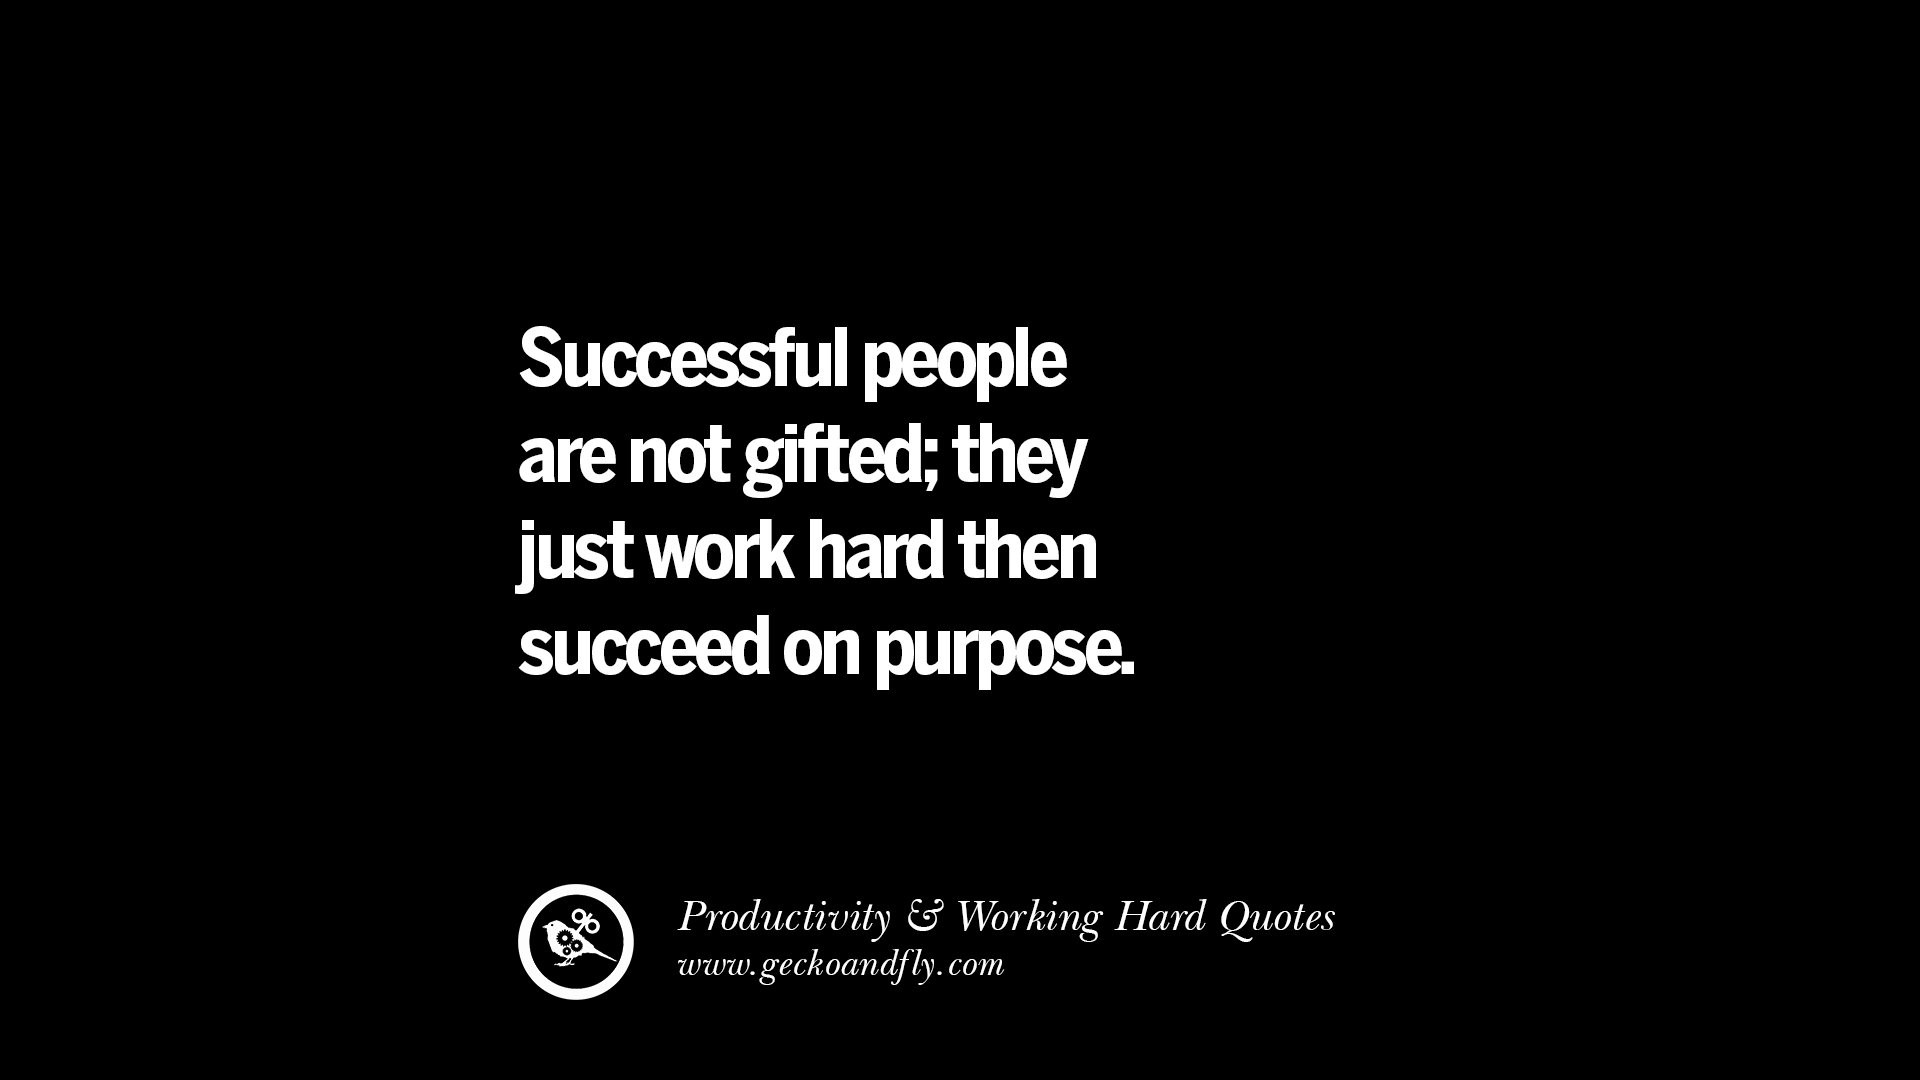 Inspirational Hard Working Quotes
 30 Uplifting Quotes Increasing Productivity And Working